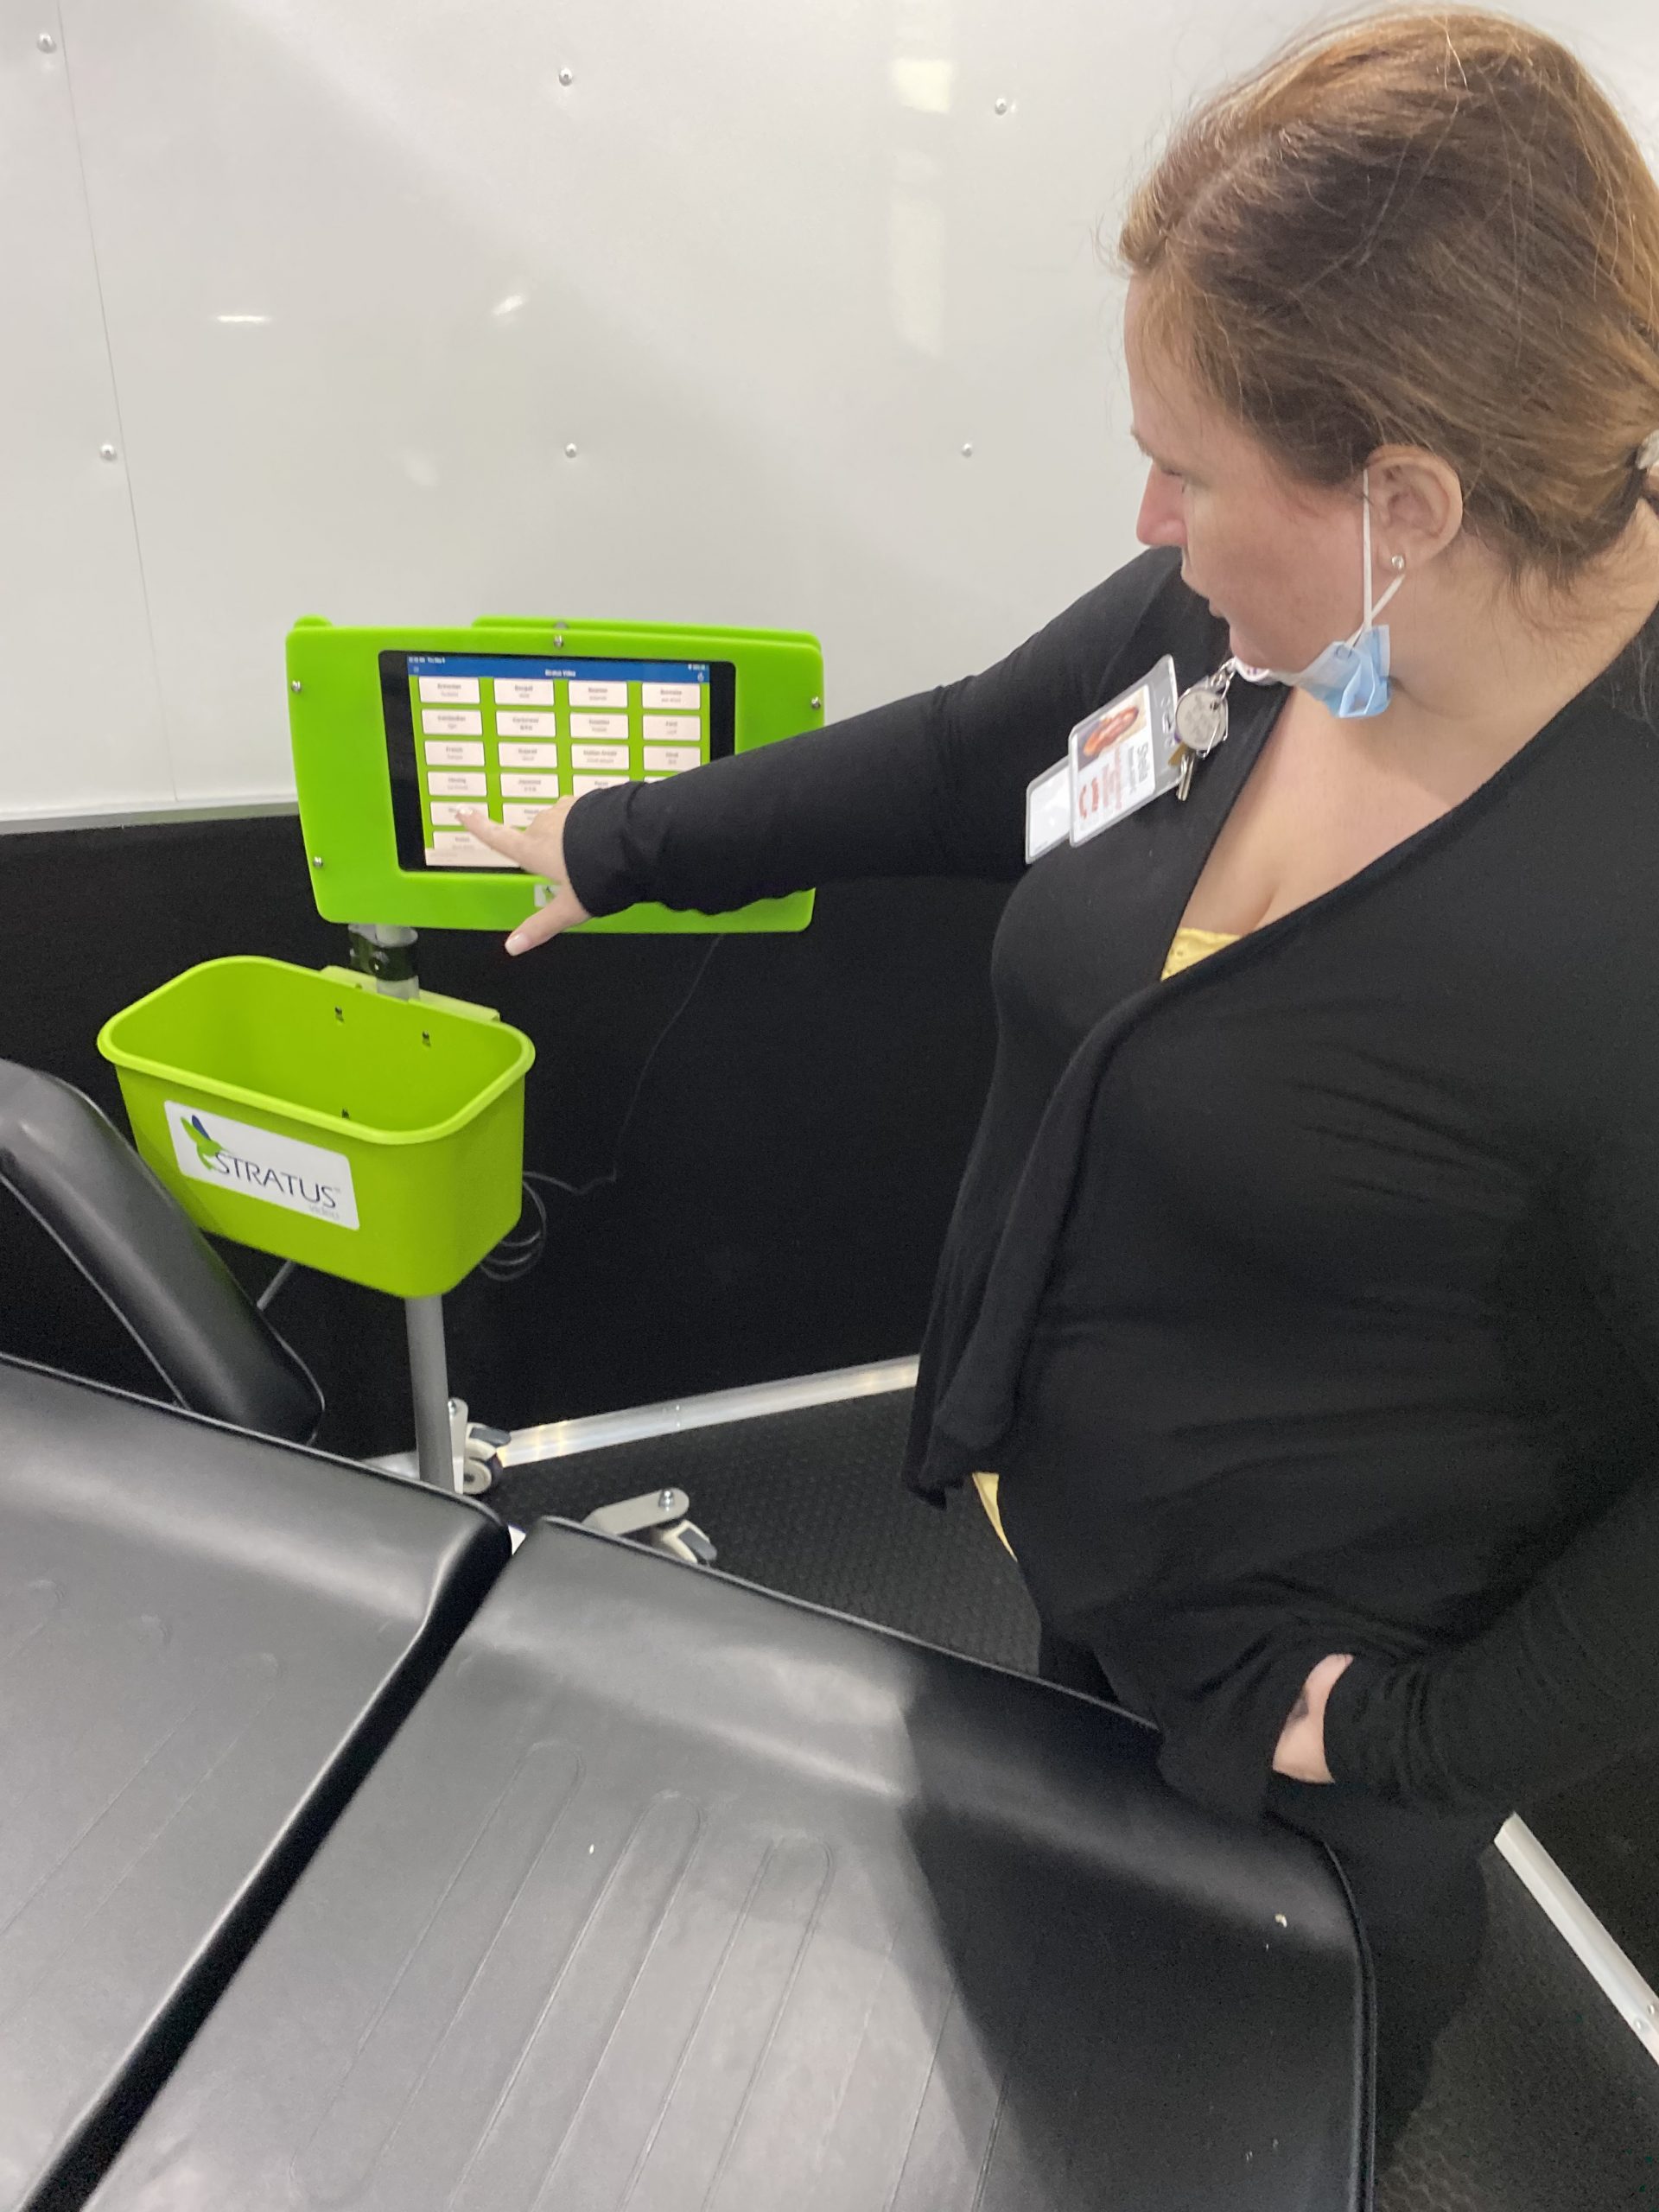 Nurse Practitioner Sheila Brown demonstrates the Stratus video device available on Goshen Medical’s mobile unit that can connect with language translators to communicate with patients.